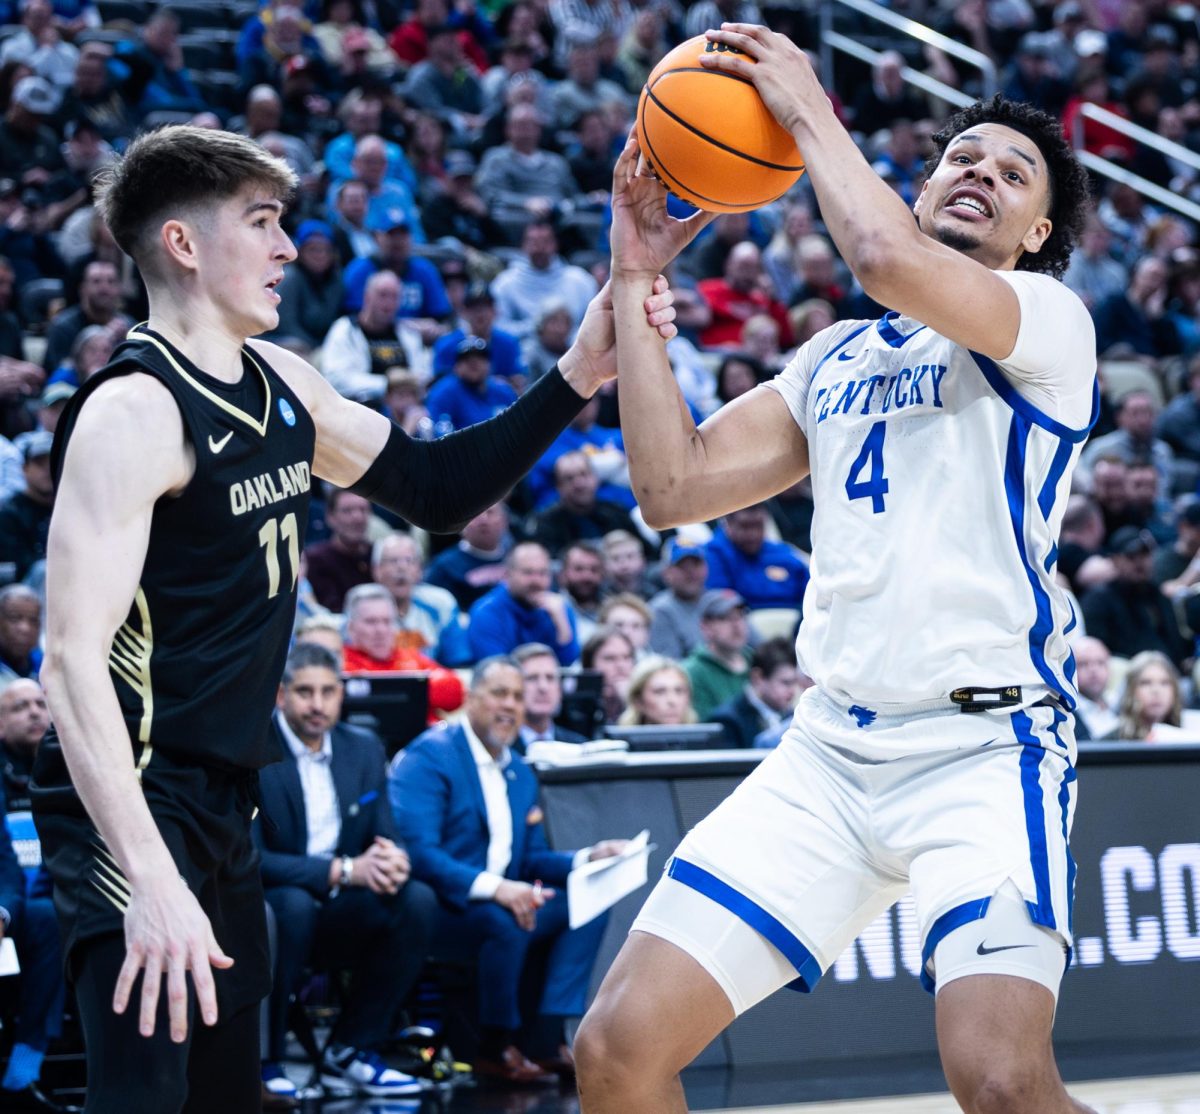 Kentucky forward Tre Mitchell (4) is fouled during the No. 3 Kentucky vs. No. 14 Oakland mens basketball game in the first round of the NCAA Tournament on Thursday, March 21, 2024, at the PPG Paints Arena in Pittsburgh, Pennsylvania. Kentucky lost 80-76. Photo by Samuel Colmar | Staff